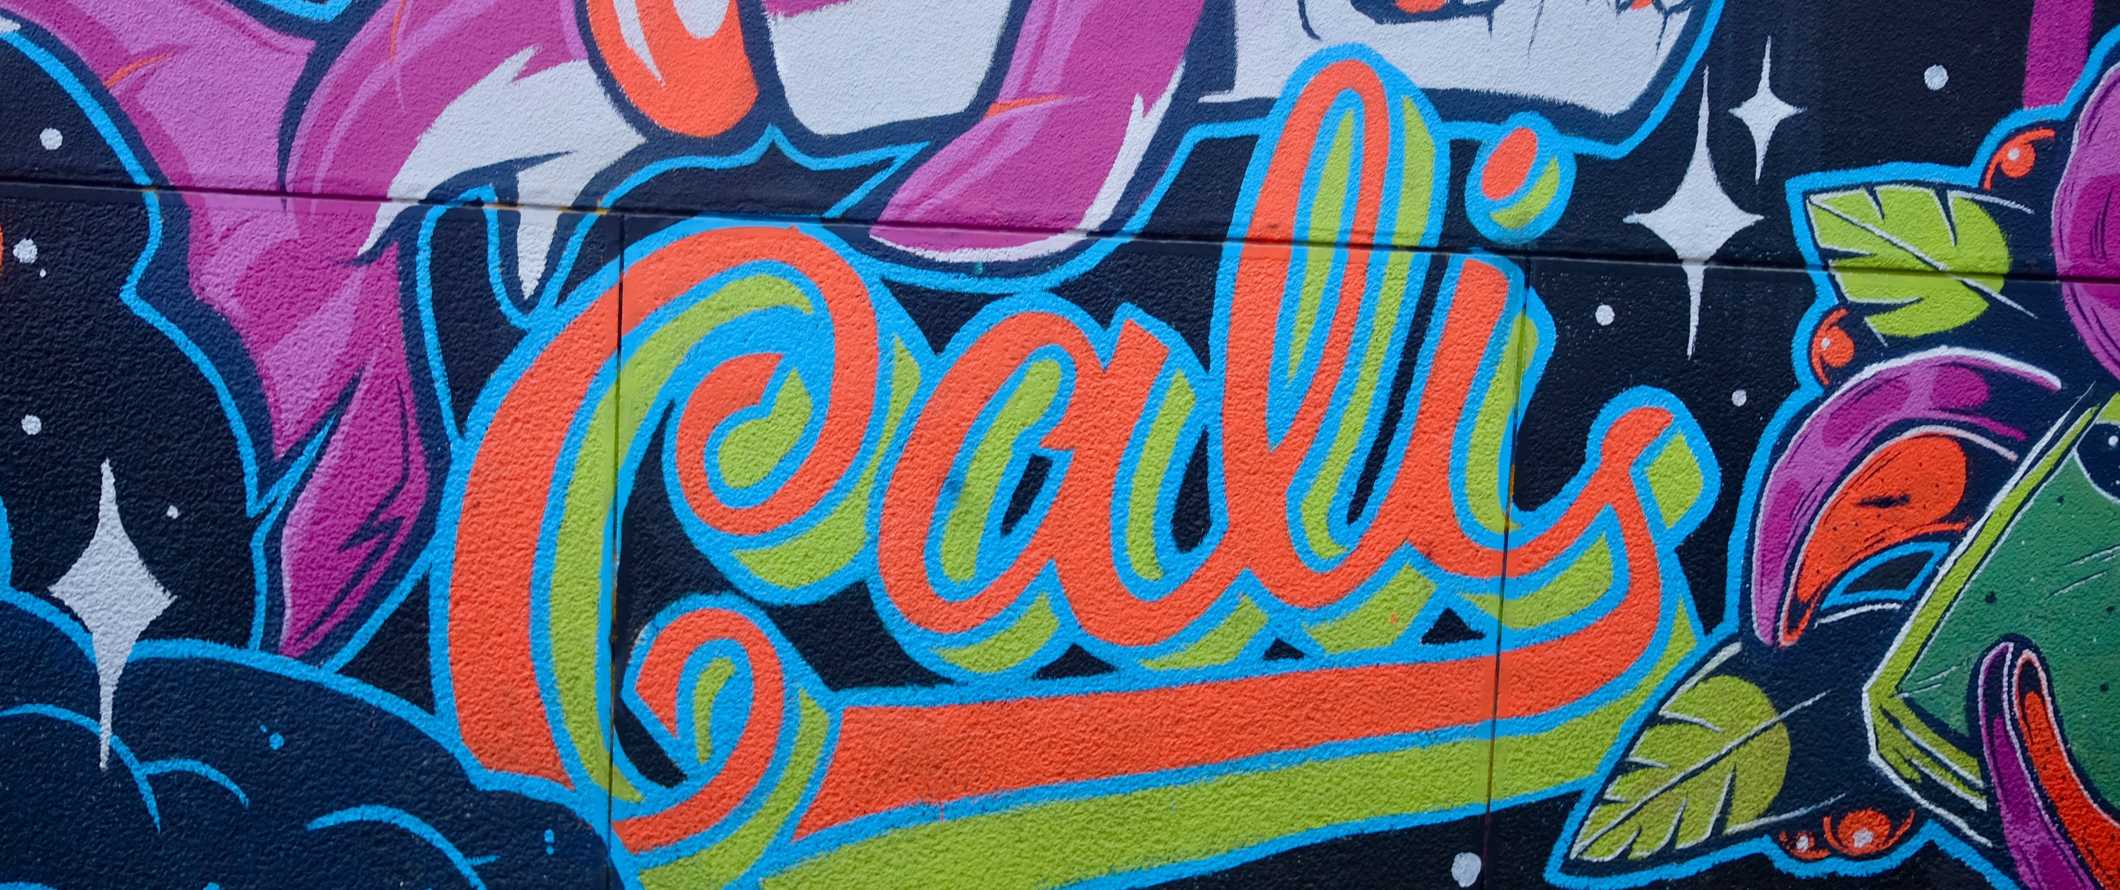 Bright graffiti letters that says 'Cali' in the city of Cali, Colombia